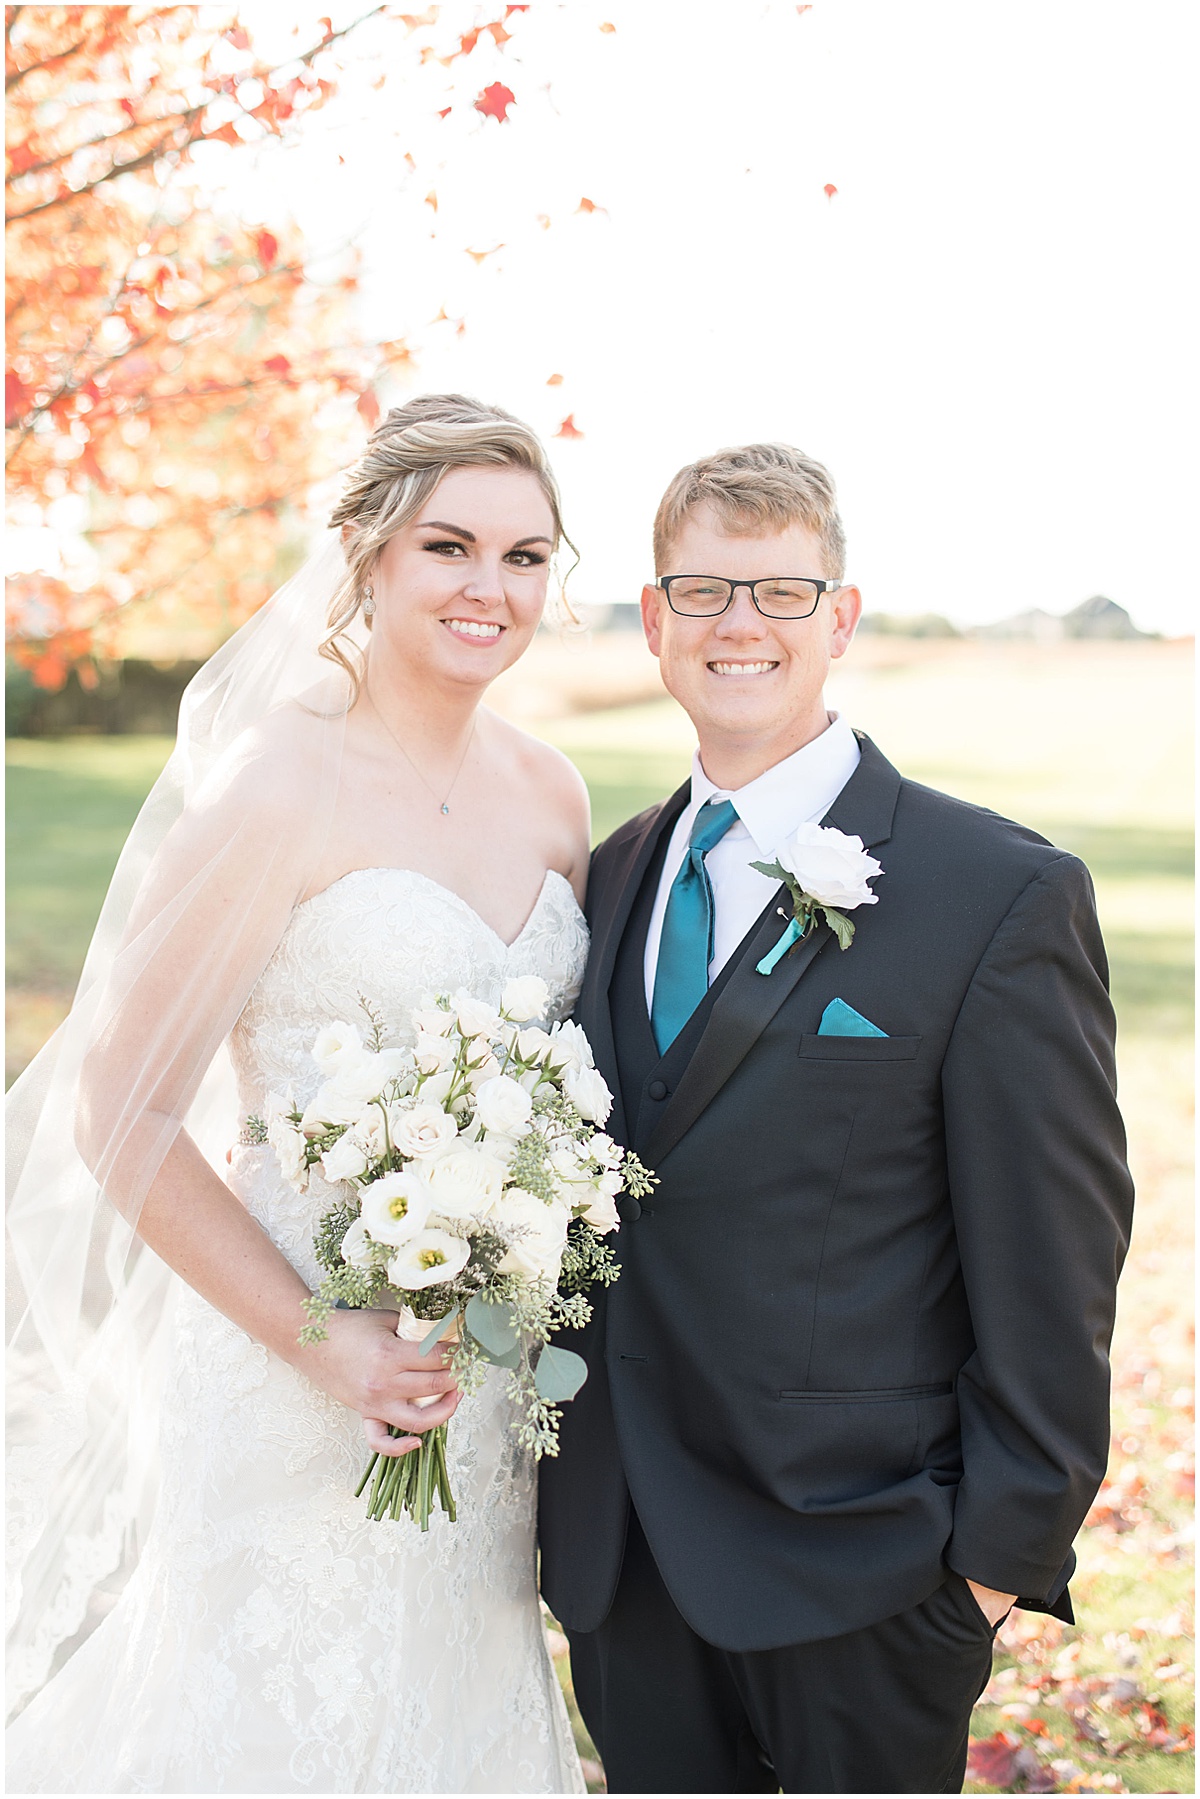 Just married photos after Cornerstone Christian Church wedding in Brownsburg, Indiana by Victoria Rayburn Photography